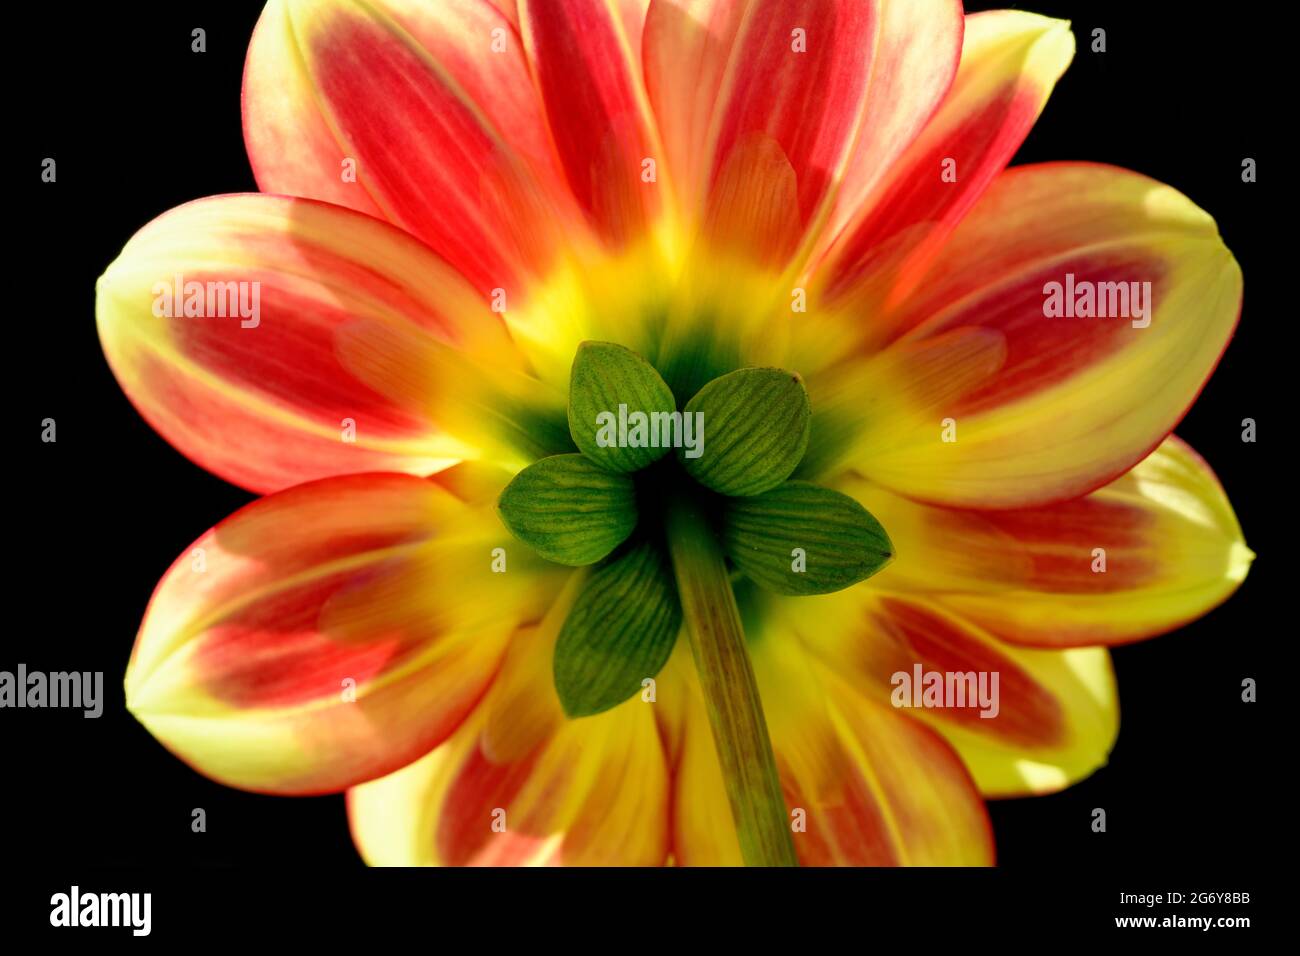 View of the underside of a beautiful yellow and red Dahlia flower Stock Photo